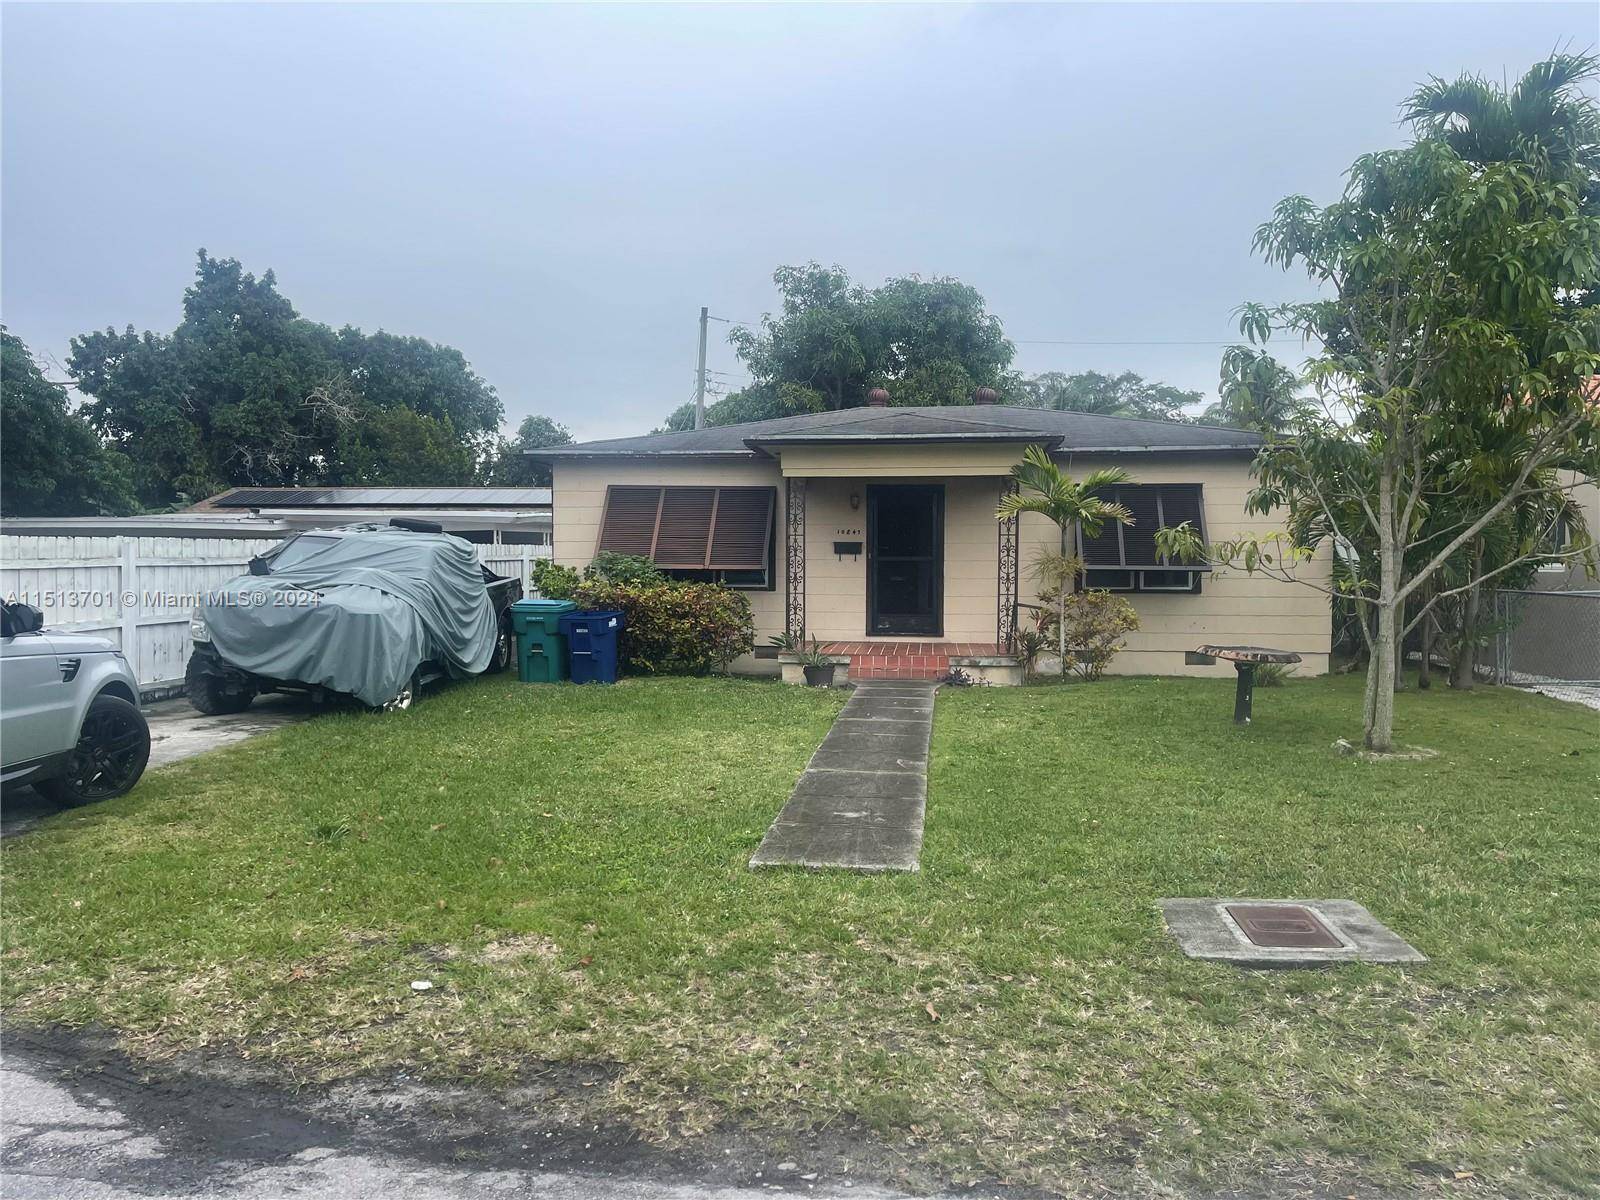 Prime location in Miami Shores, investor special needs some TLC, 2 bedrooms and 1 bathroom with a Florida room, screened porch, located in a dead end in a great neighborhood.